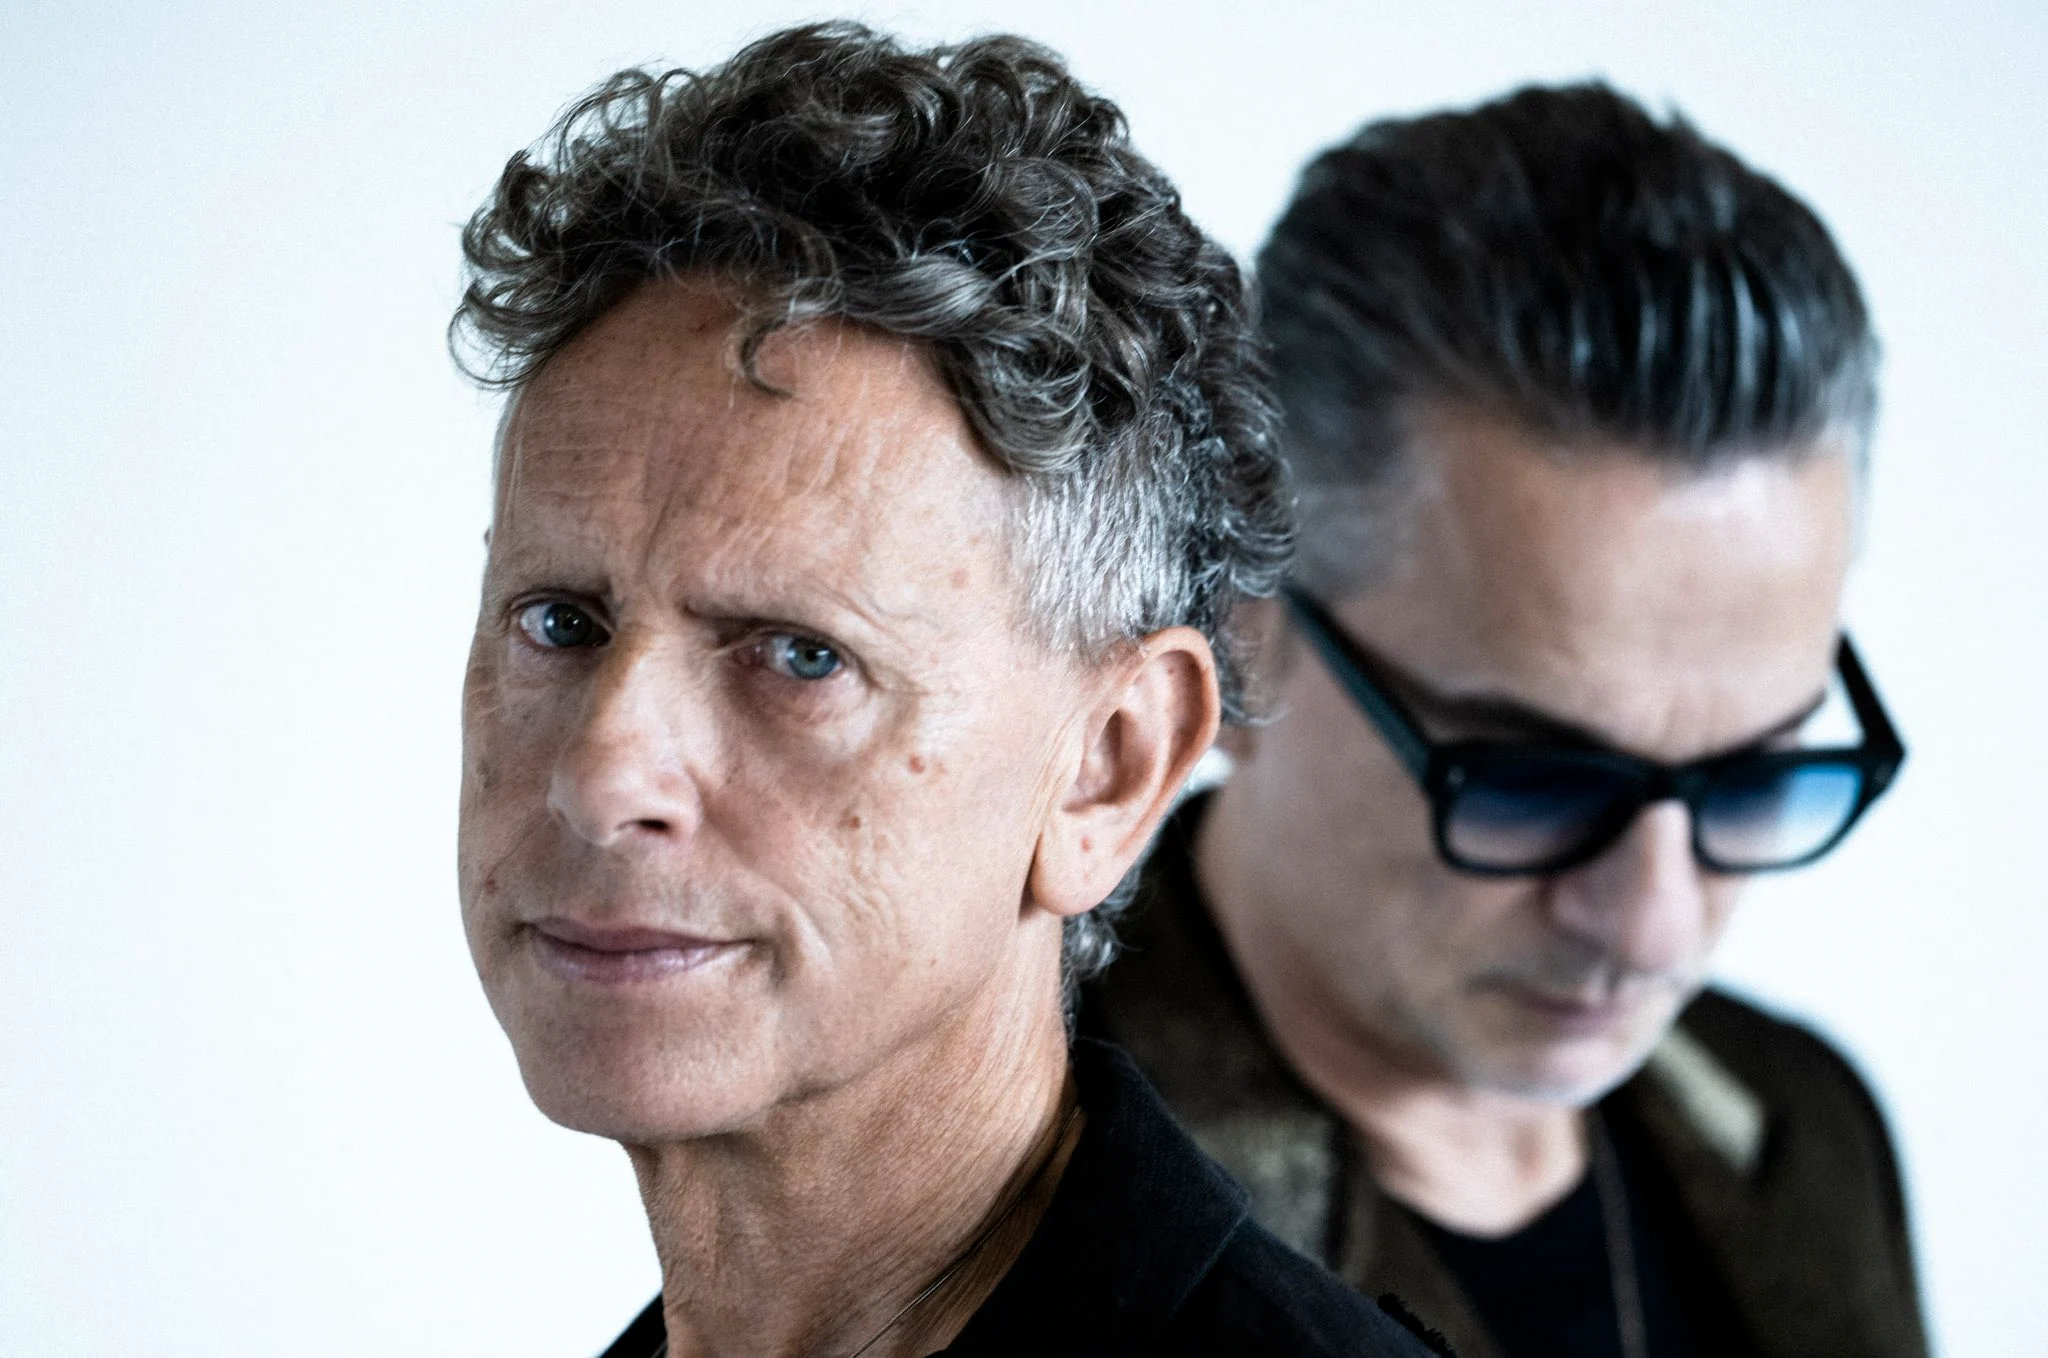 Depeche Mode's Martin Gore: 'I Can't Claim That the Songs Were All